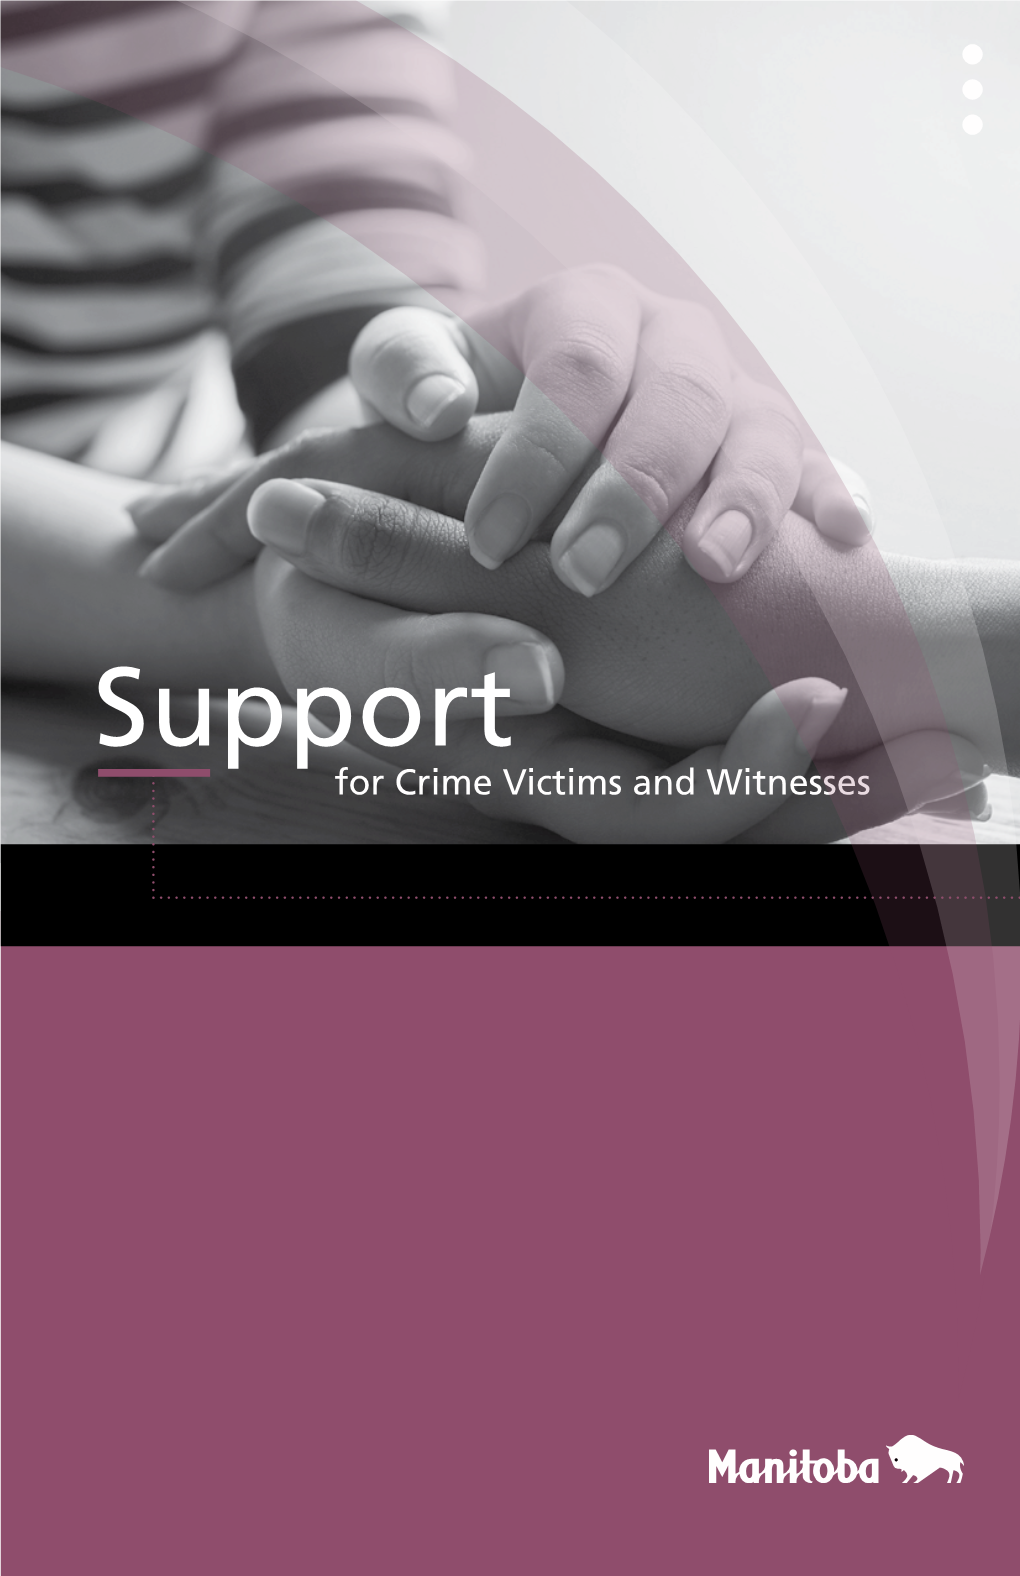 Support for Crime Victims and Witnesses Manitoba Justice – Victim Services Supports Victims of Serious Crimes, As Outlined in the Victims’ Bill of Rights